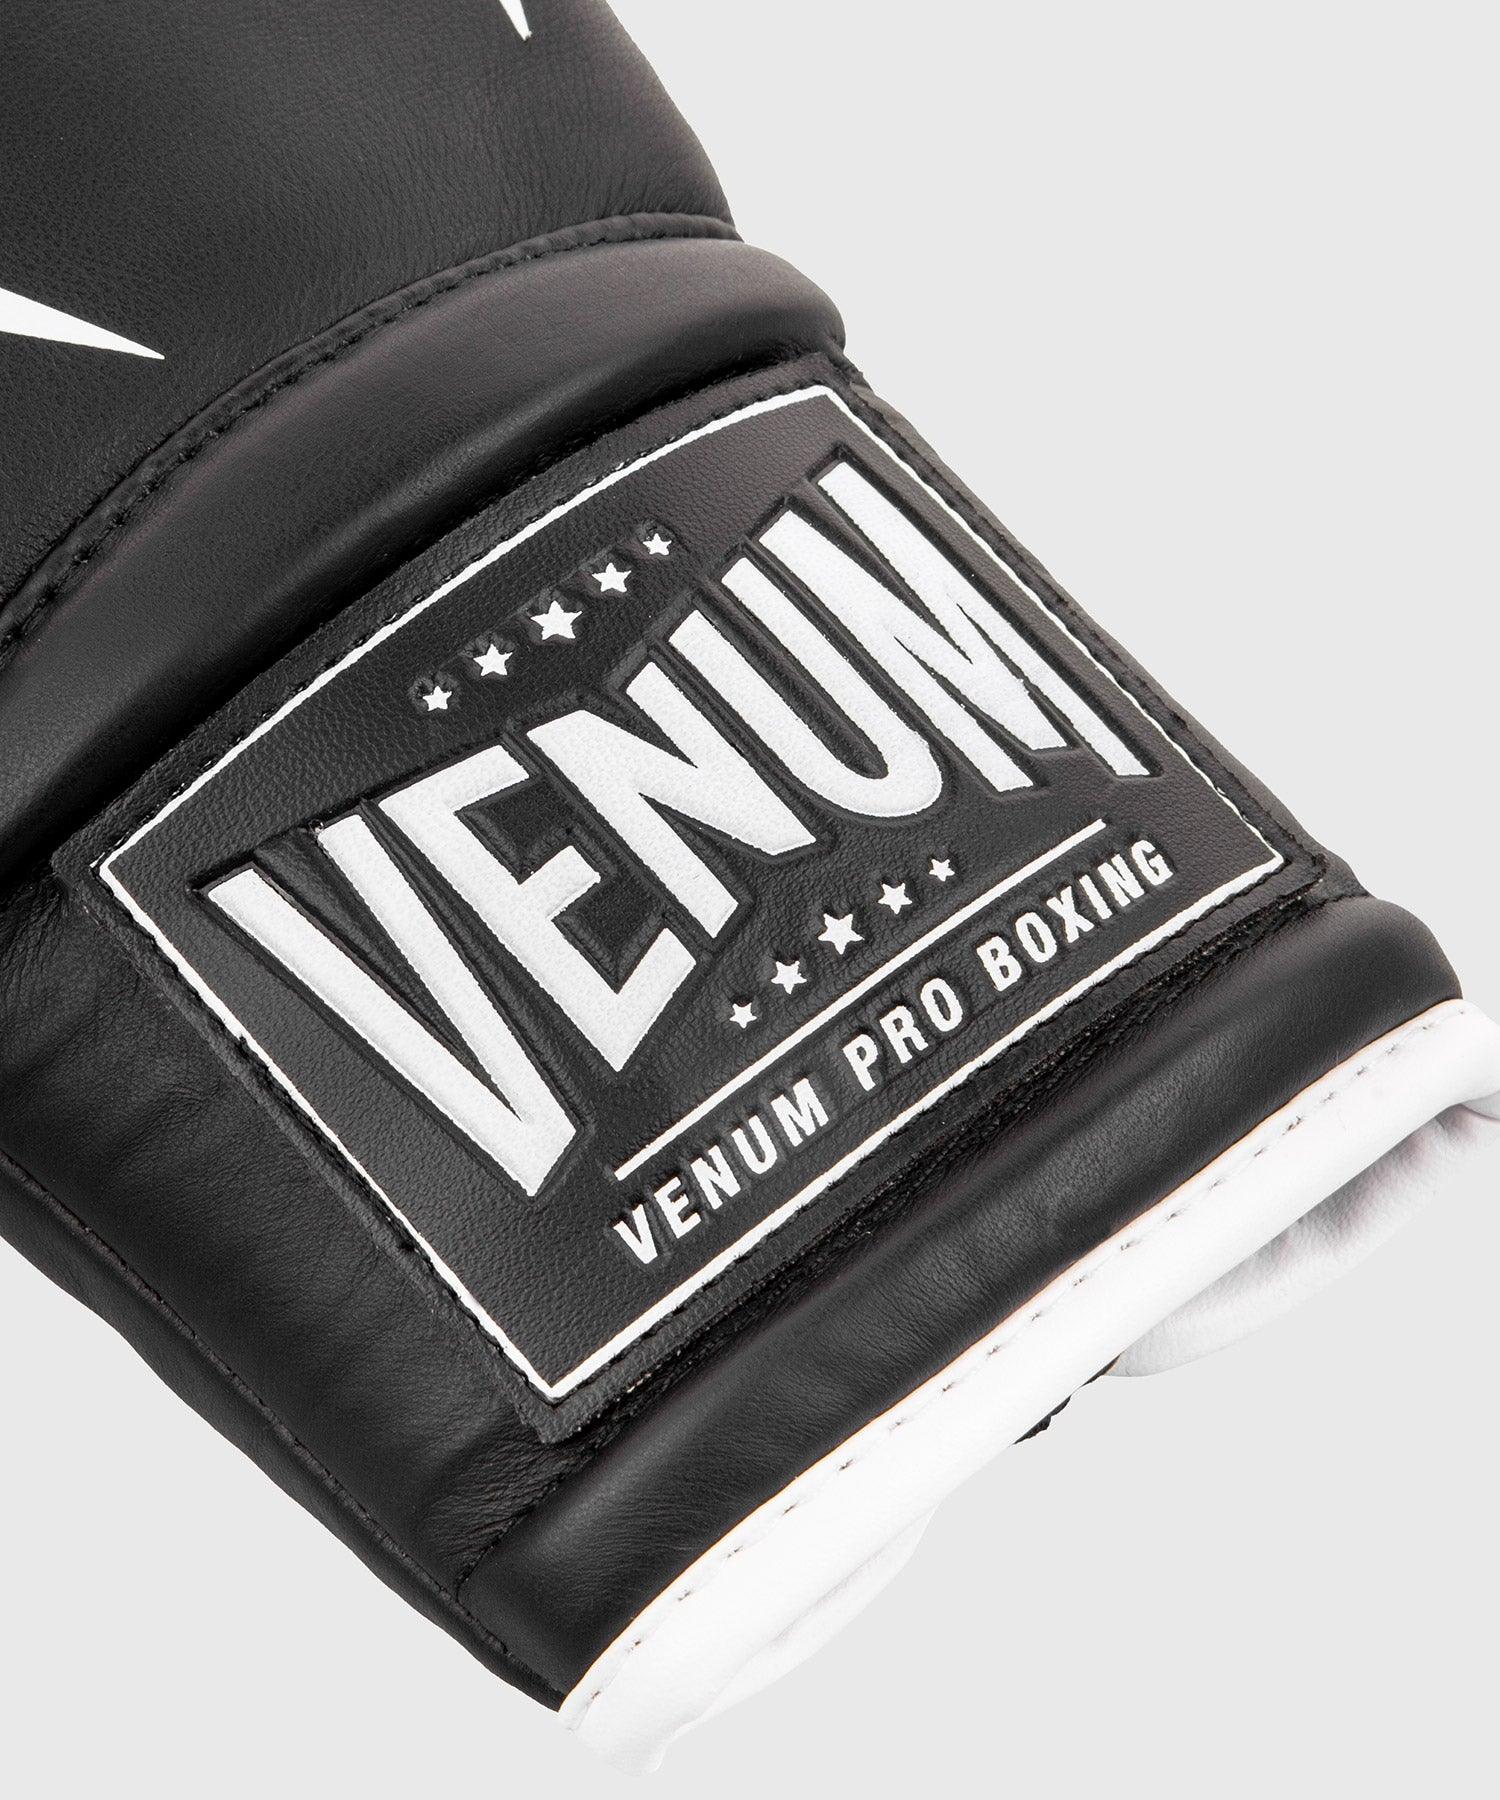 Venum Giant 2.0 Pro Boxing Gloves - With Laces - Black/White Picture 7